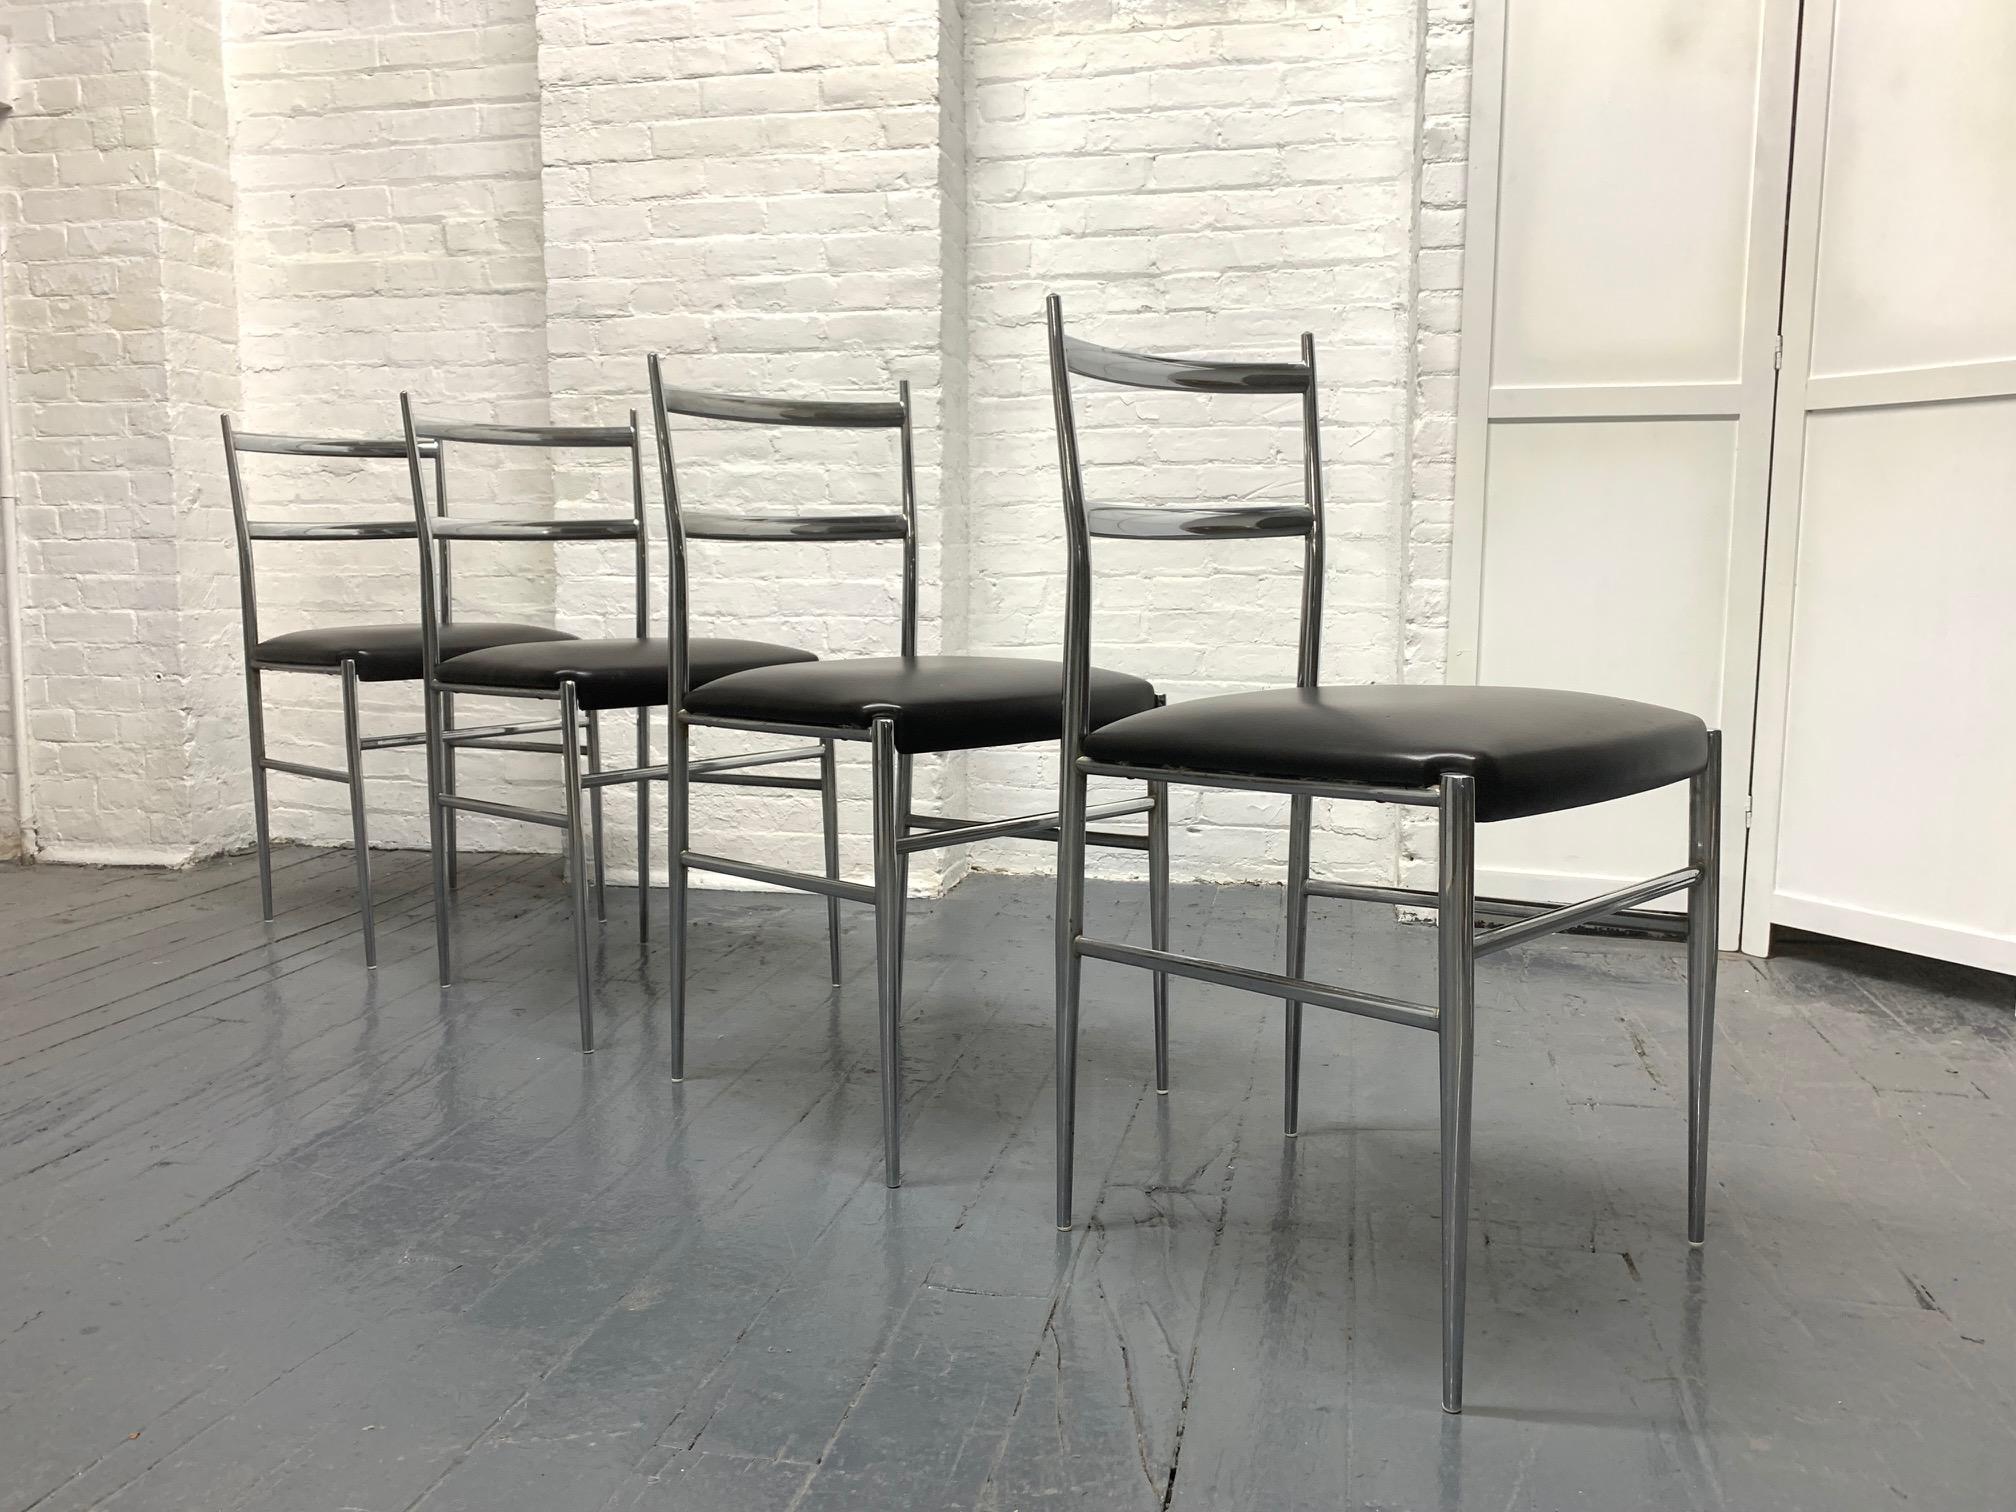 Set of four Gio Ponti style Italian chrome chairs. The seats of the chairs are black vinyl and marked 